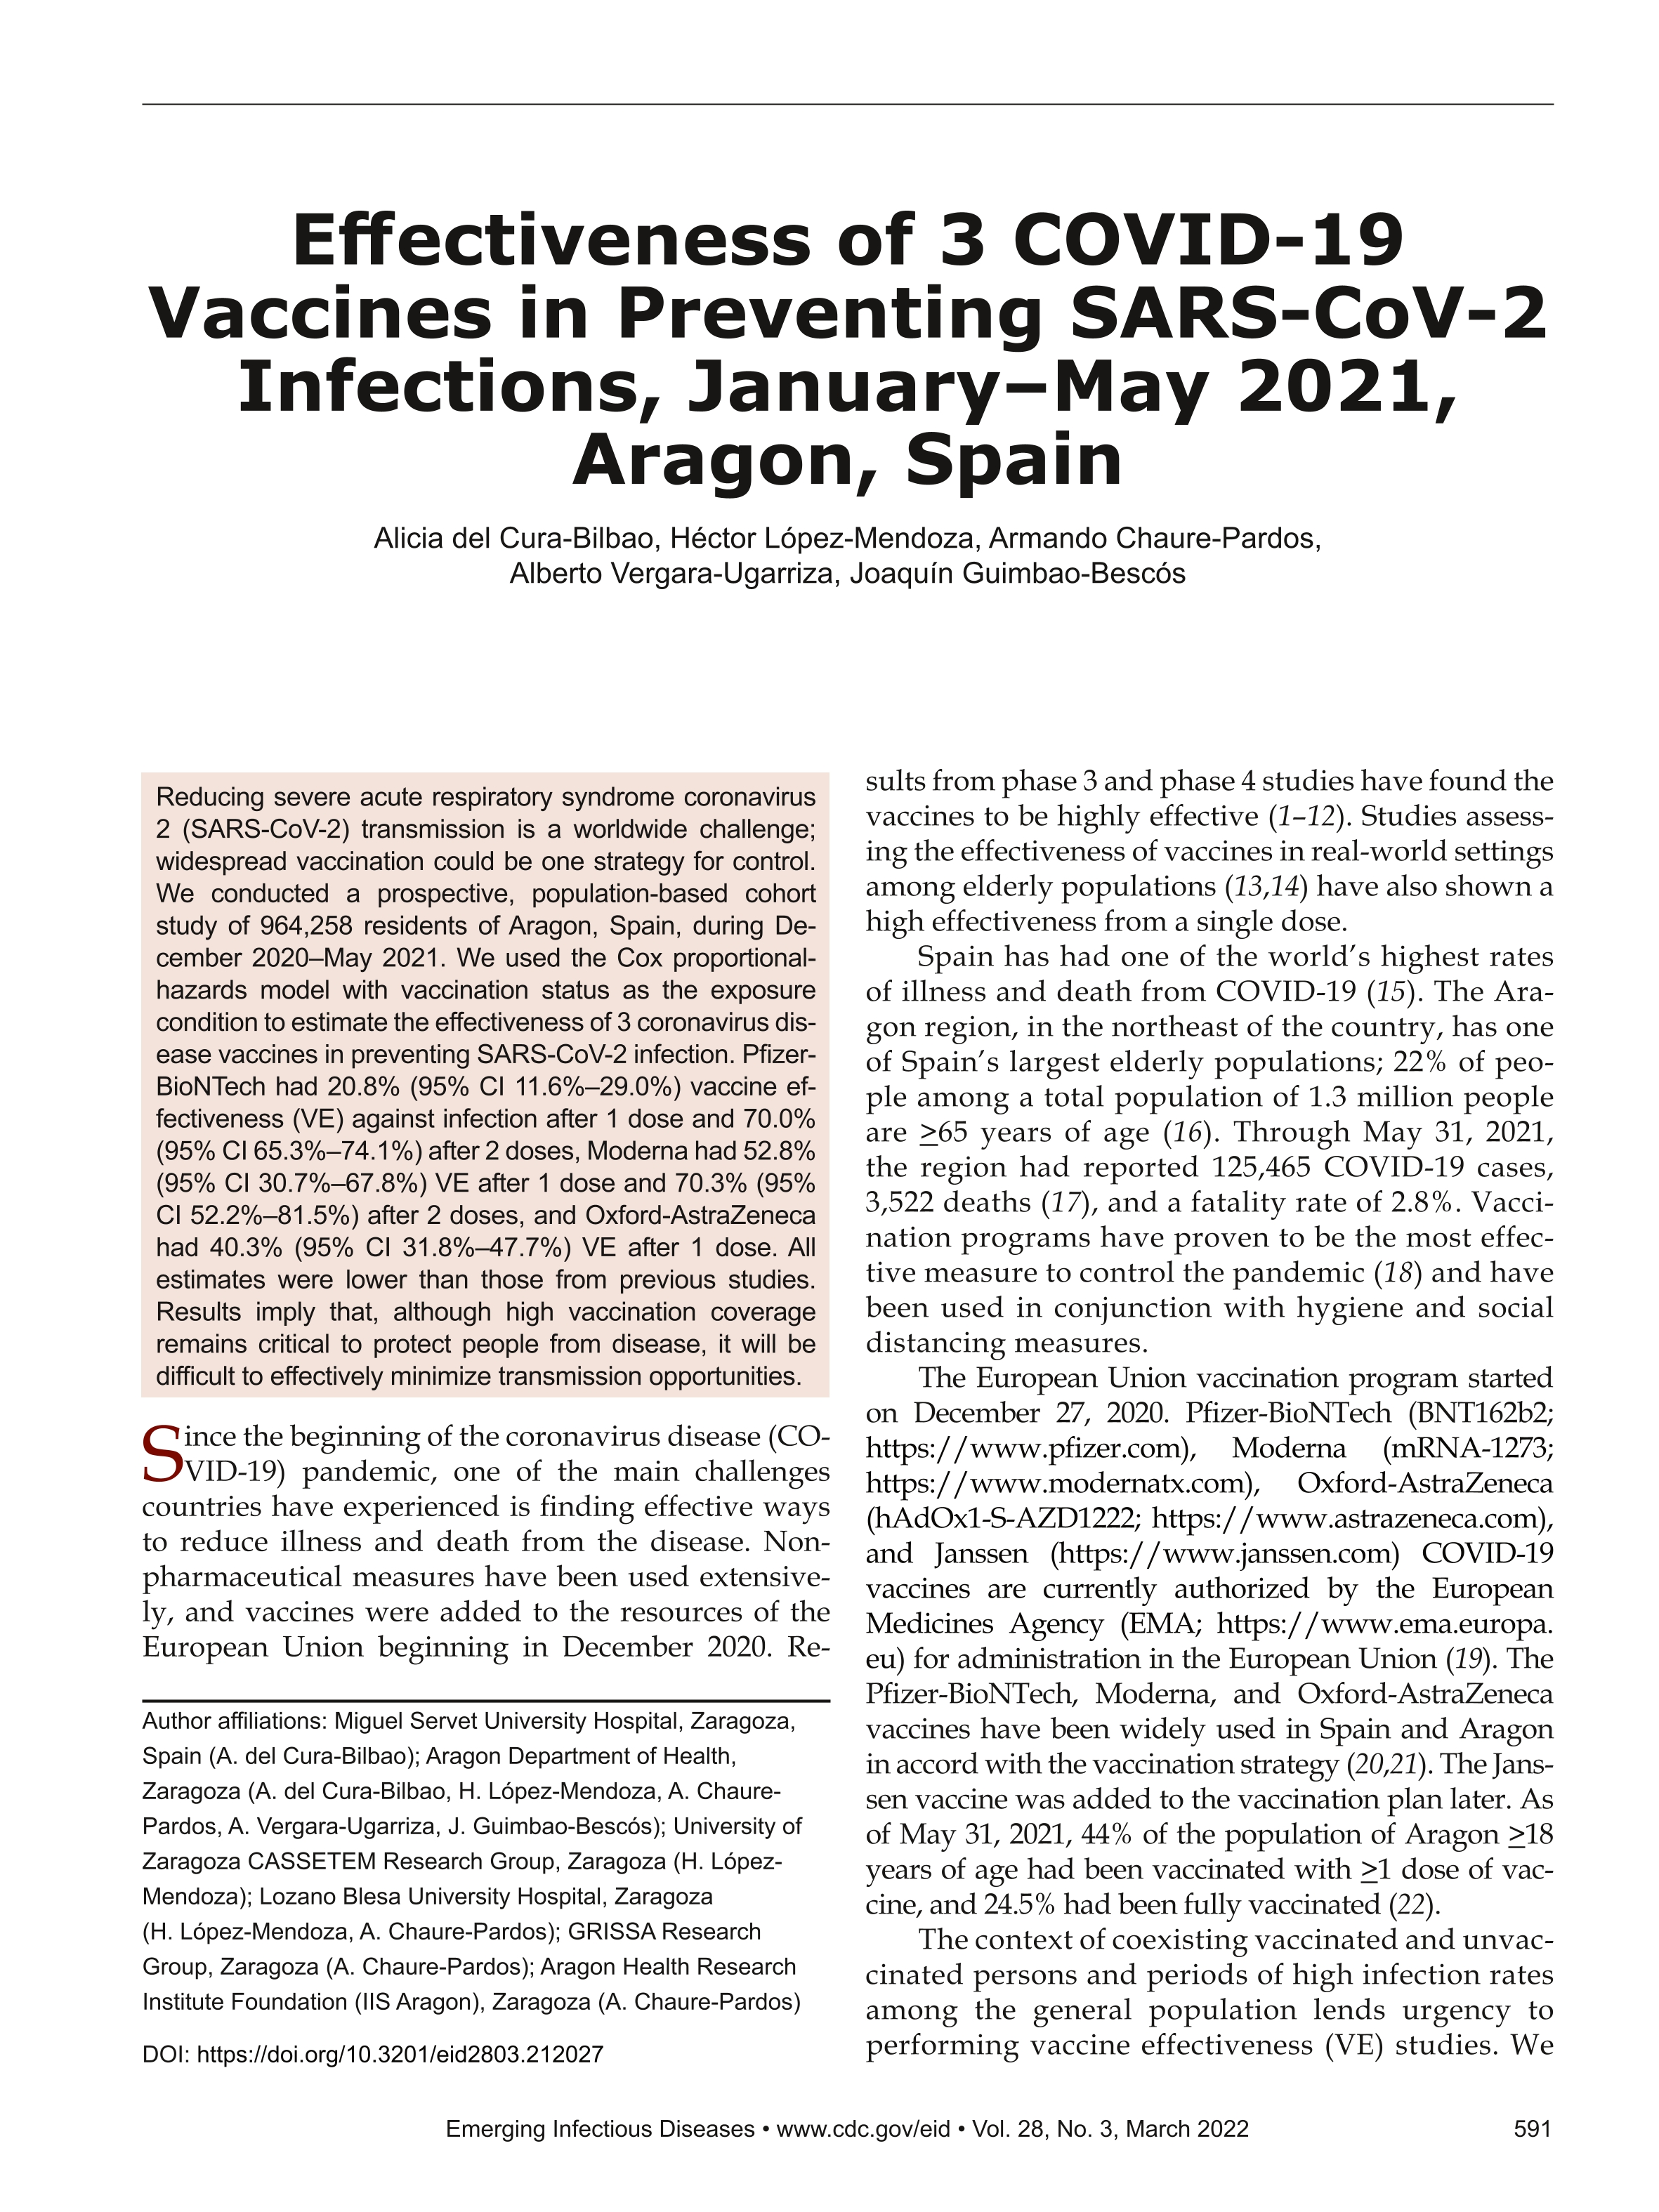 Effectiveness of 3 COVID-19 vaccines in preventing SARS-CoV-2 infections, January–May 2021, Aragon, Spain